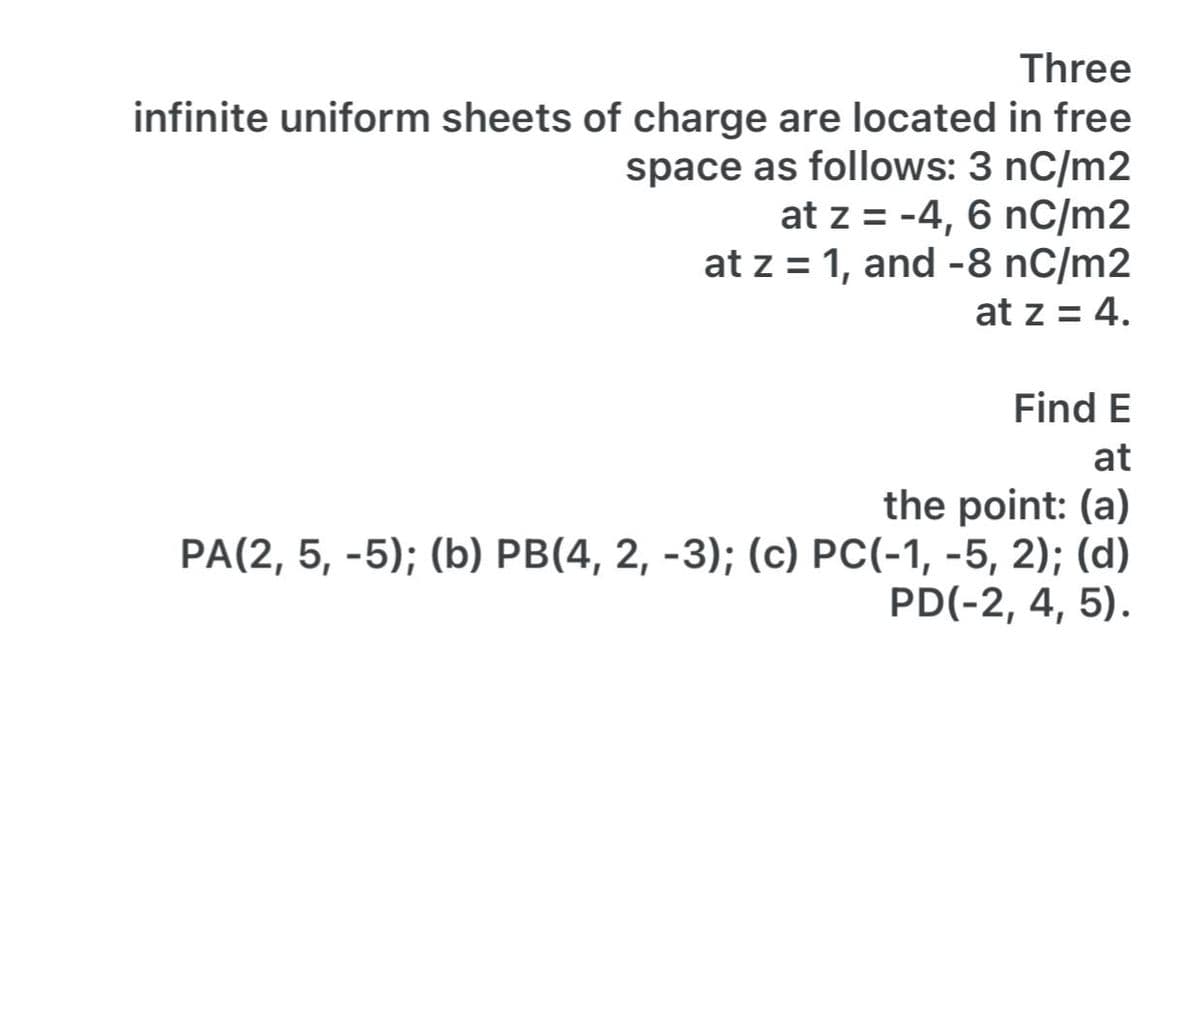 Three
infinite uniform sheets of charge are located in free
space as follows: 3 nC/m2
at z = -4, 6 nC/m2
at z = 1, and -8 nC/m2
at z = 4.
Find E
at
the point: (a)
PA(2, 5, -5); (b) PB(4, 2, -3); (c) PC(-1, -5, 2); (d)
PD(-2, 4, 5).